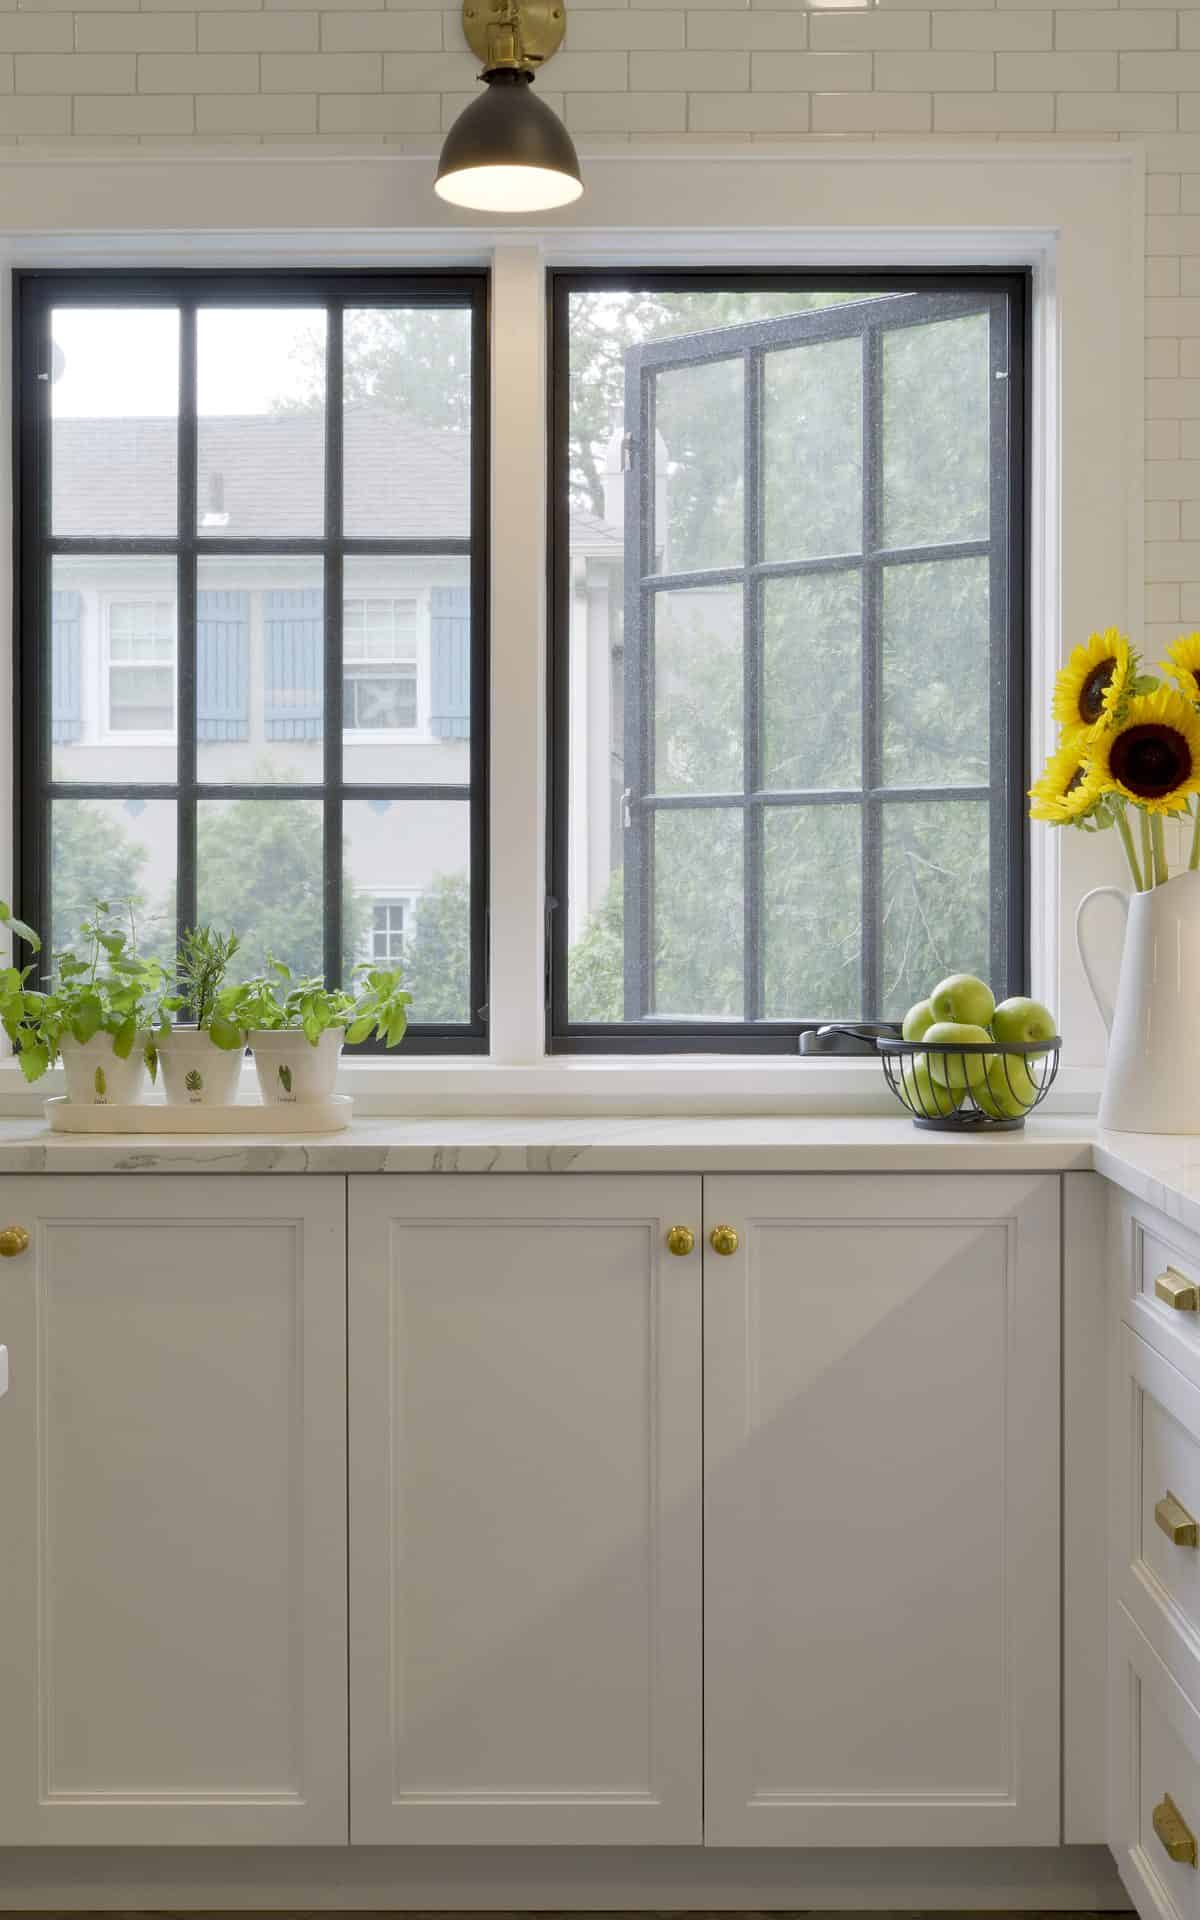 White kitchen with black window frames and white classic cabinetry